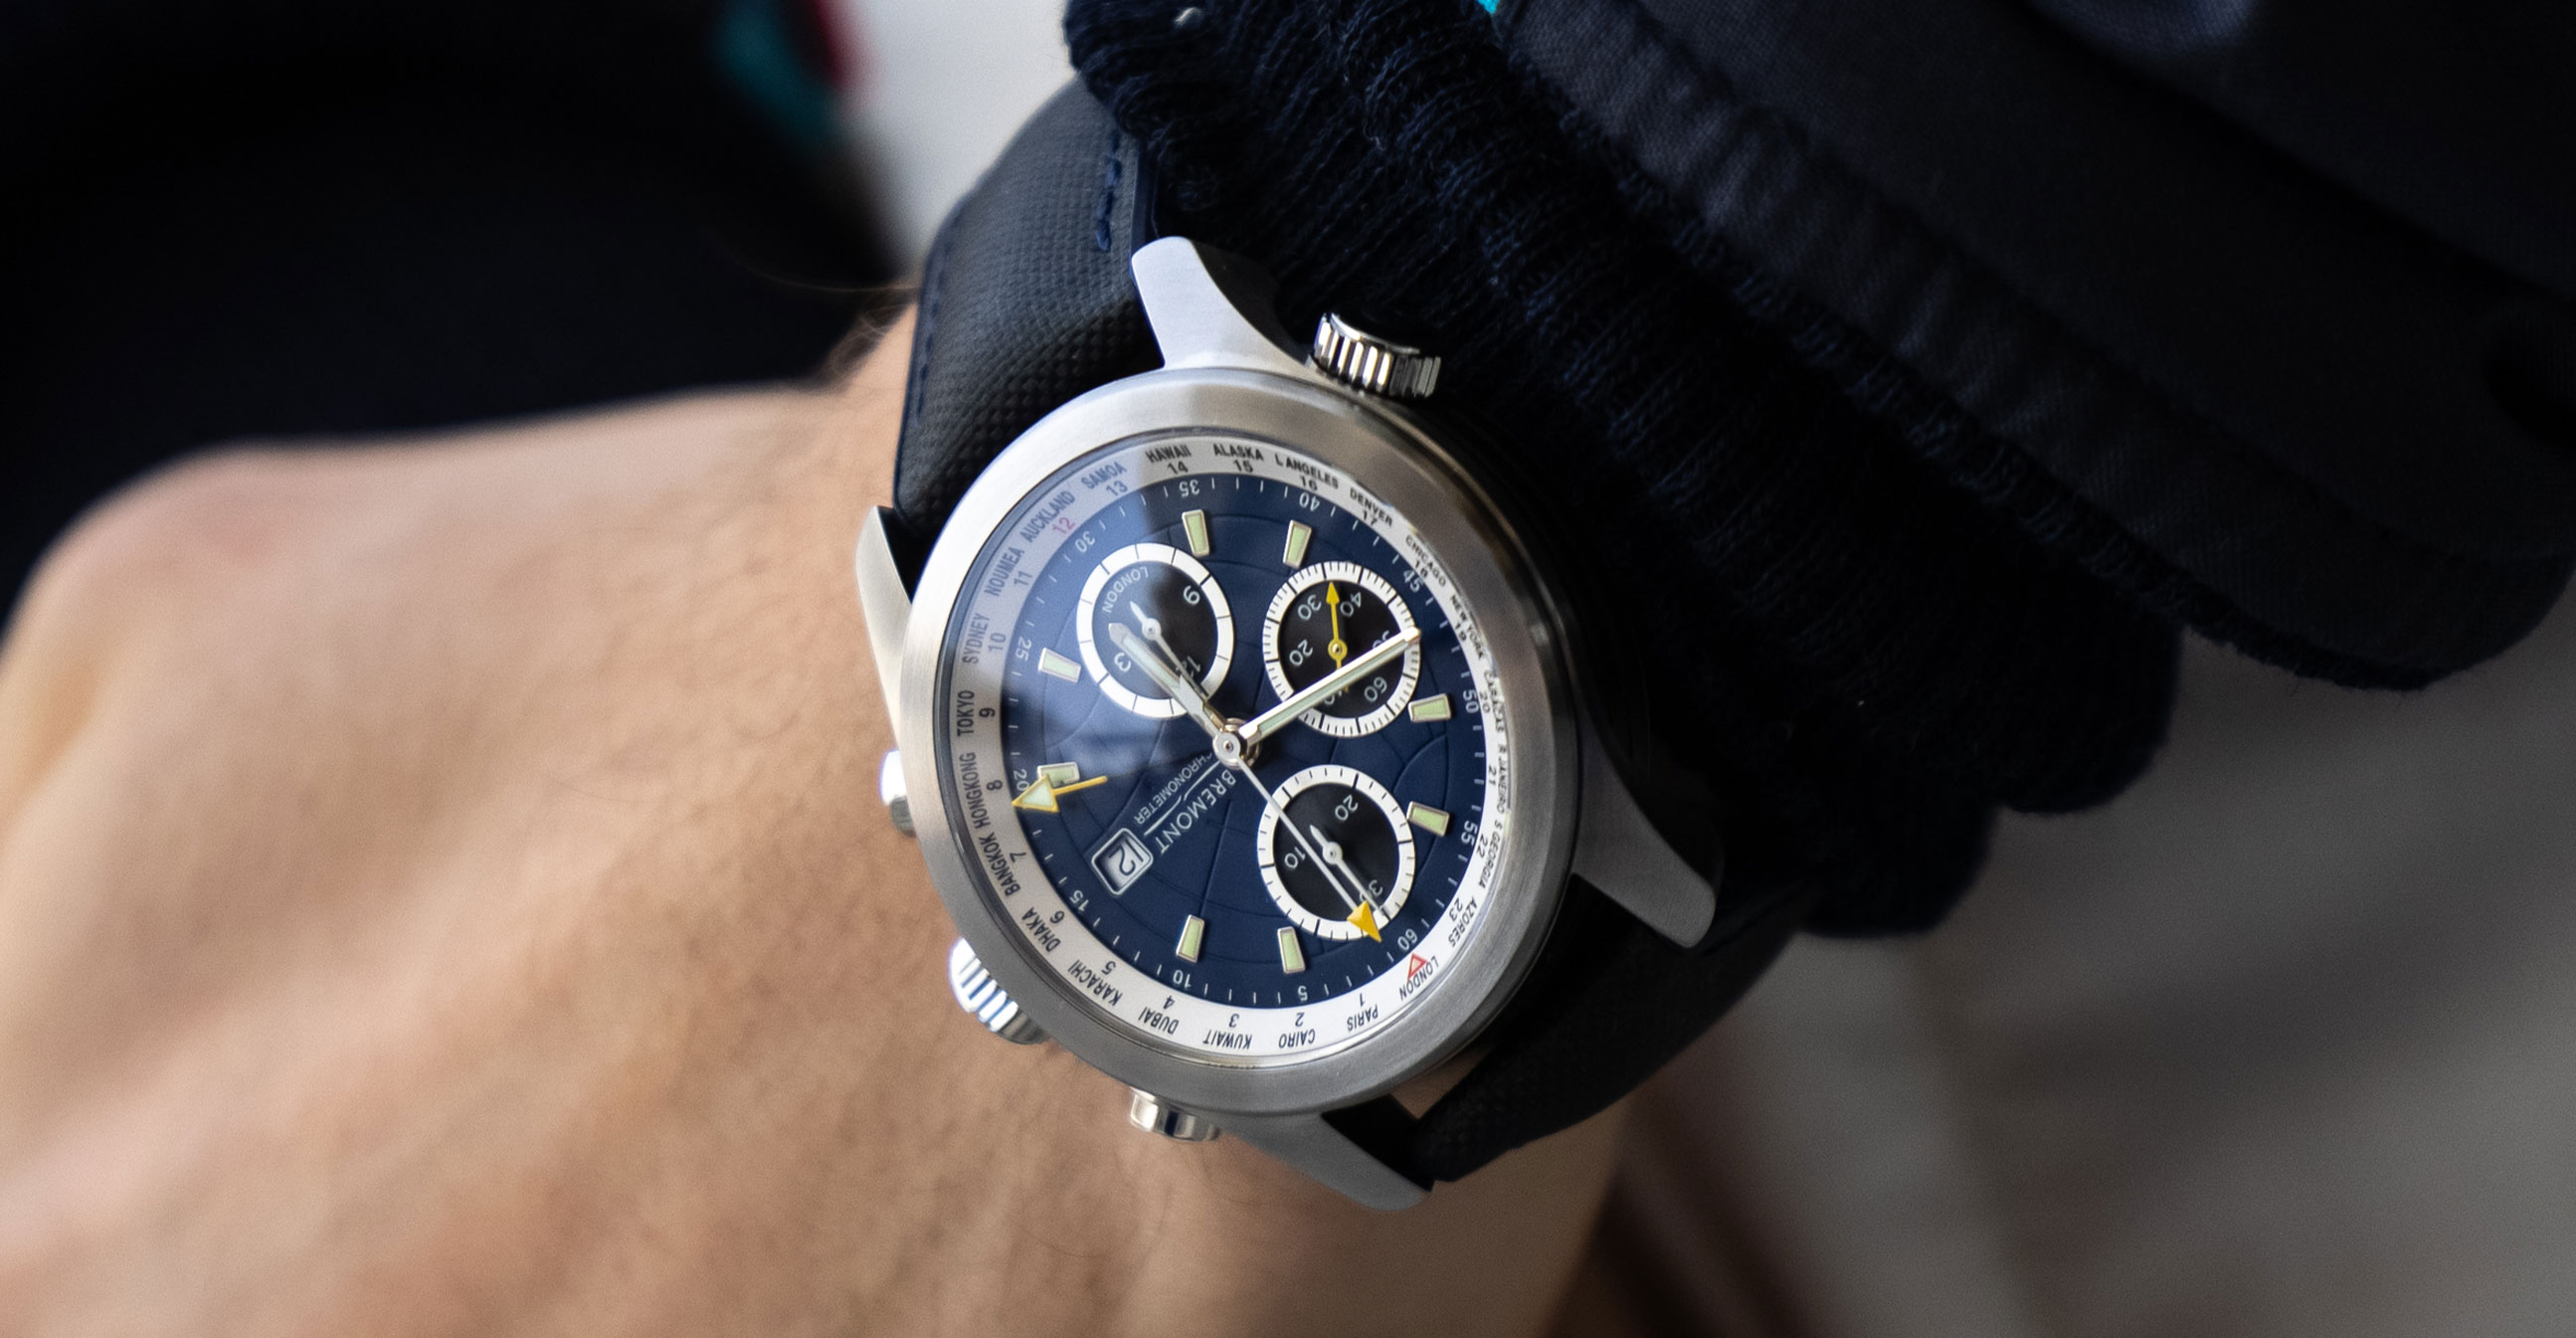 BREMONT BECOMES OFFICIAL TIMING PARTNER TO BRITISH RACING ICON WILLIAMS RACING